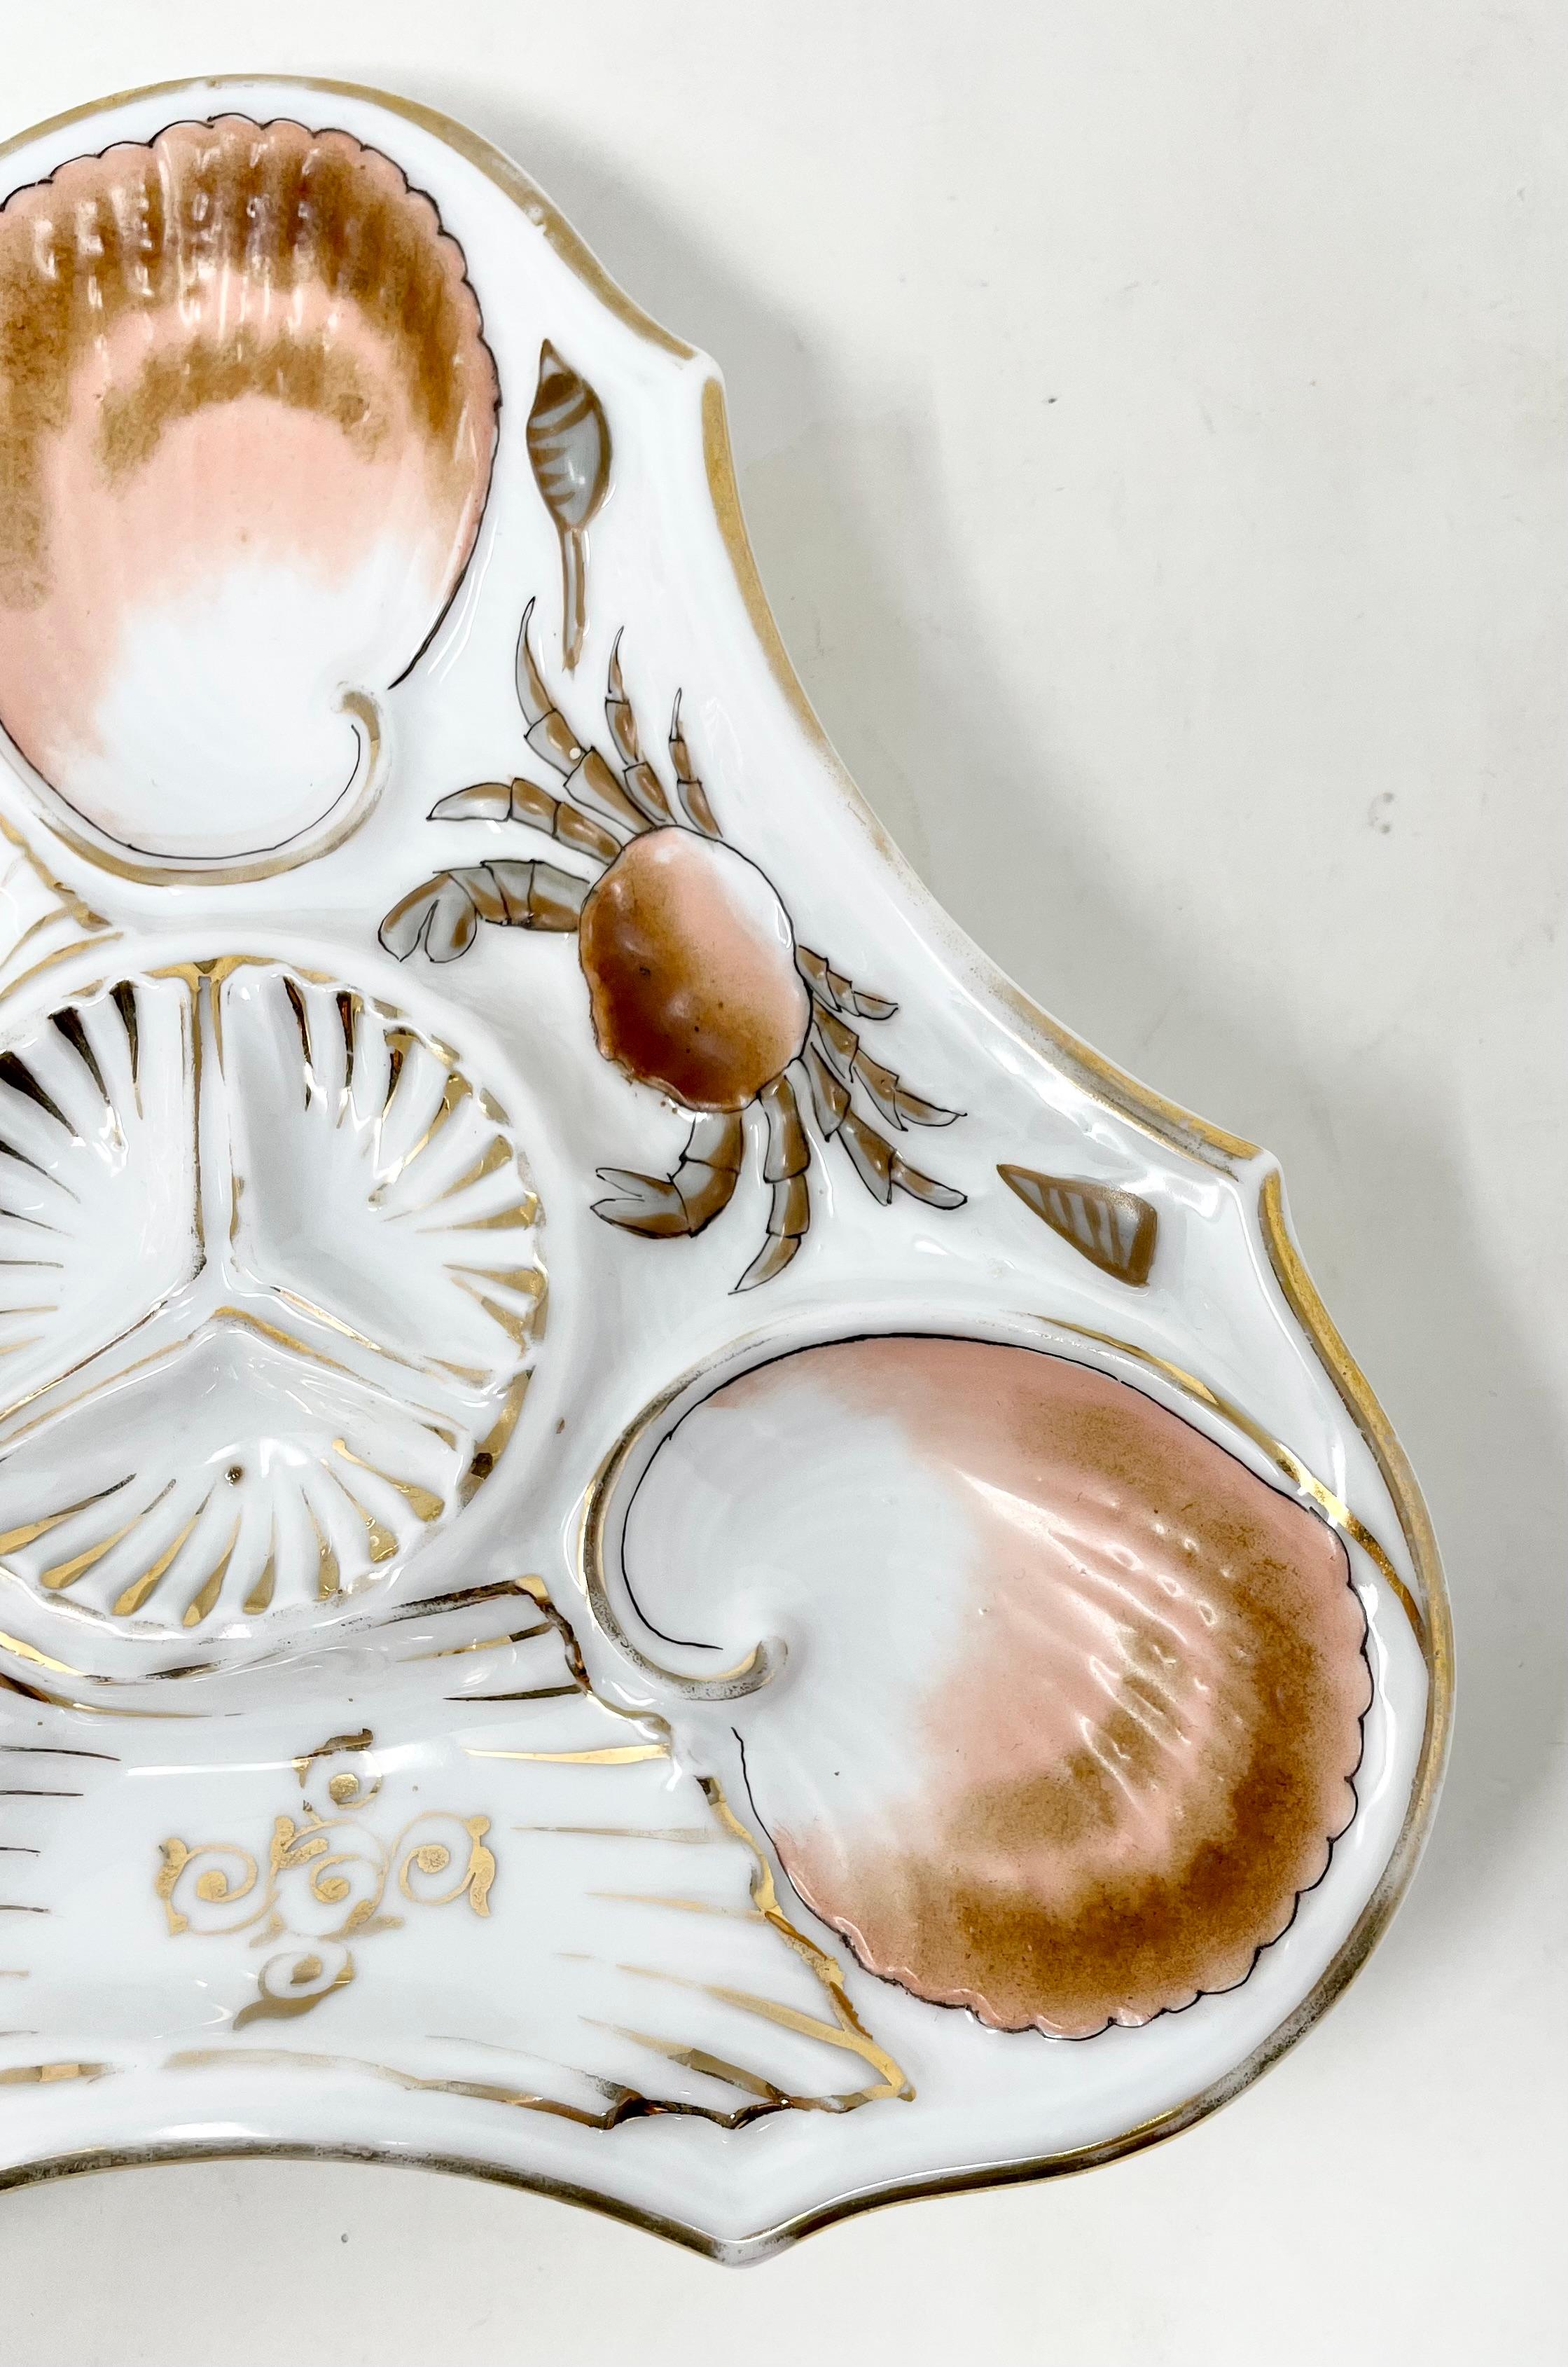 Rare antique continental porcelain hand-painted triangle design oyster plate, circa 1880-1890s.
Pretty hand-painted crab with sea-shells in peach, umber and gold colors.